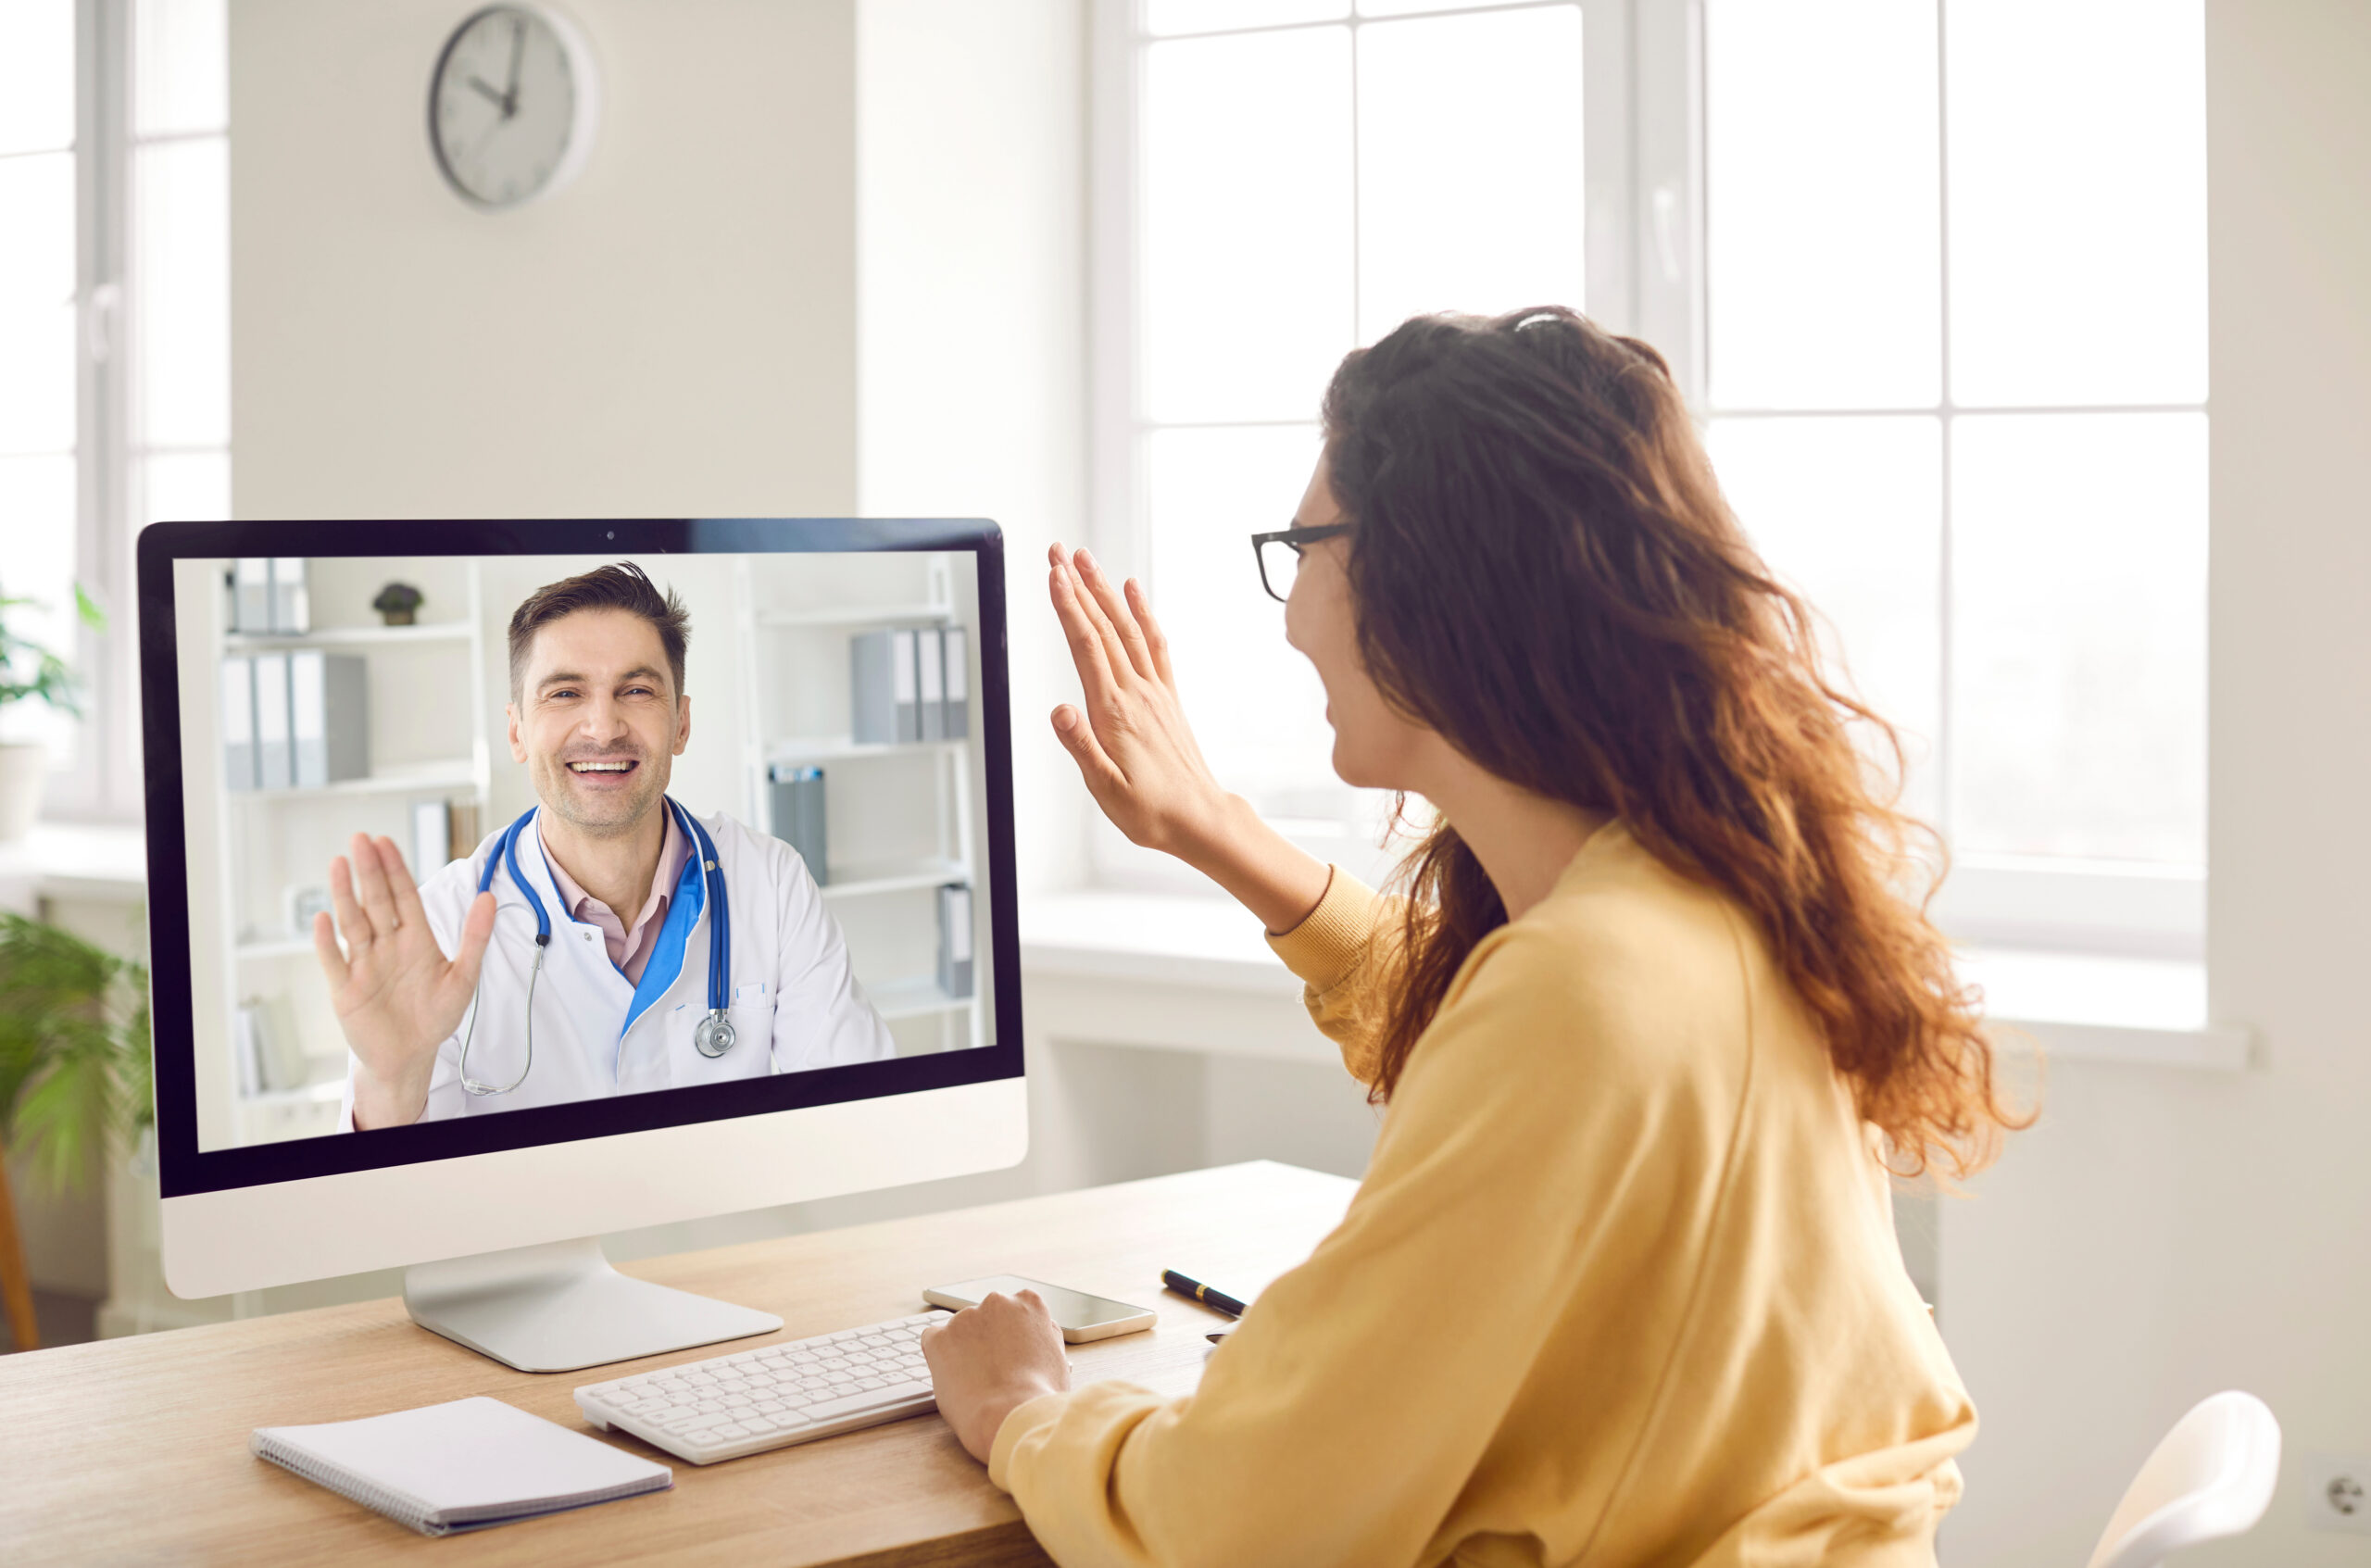 Woman says hello to online doctor when they start medical consultation via video call